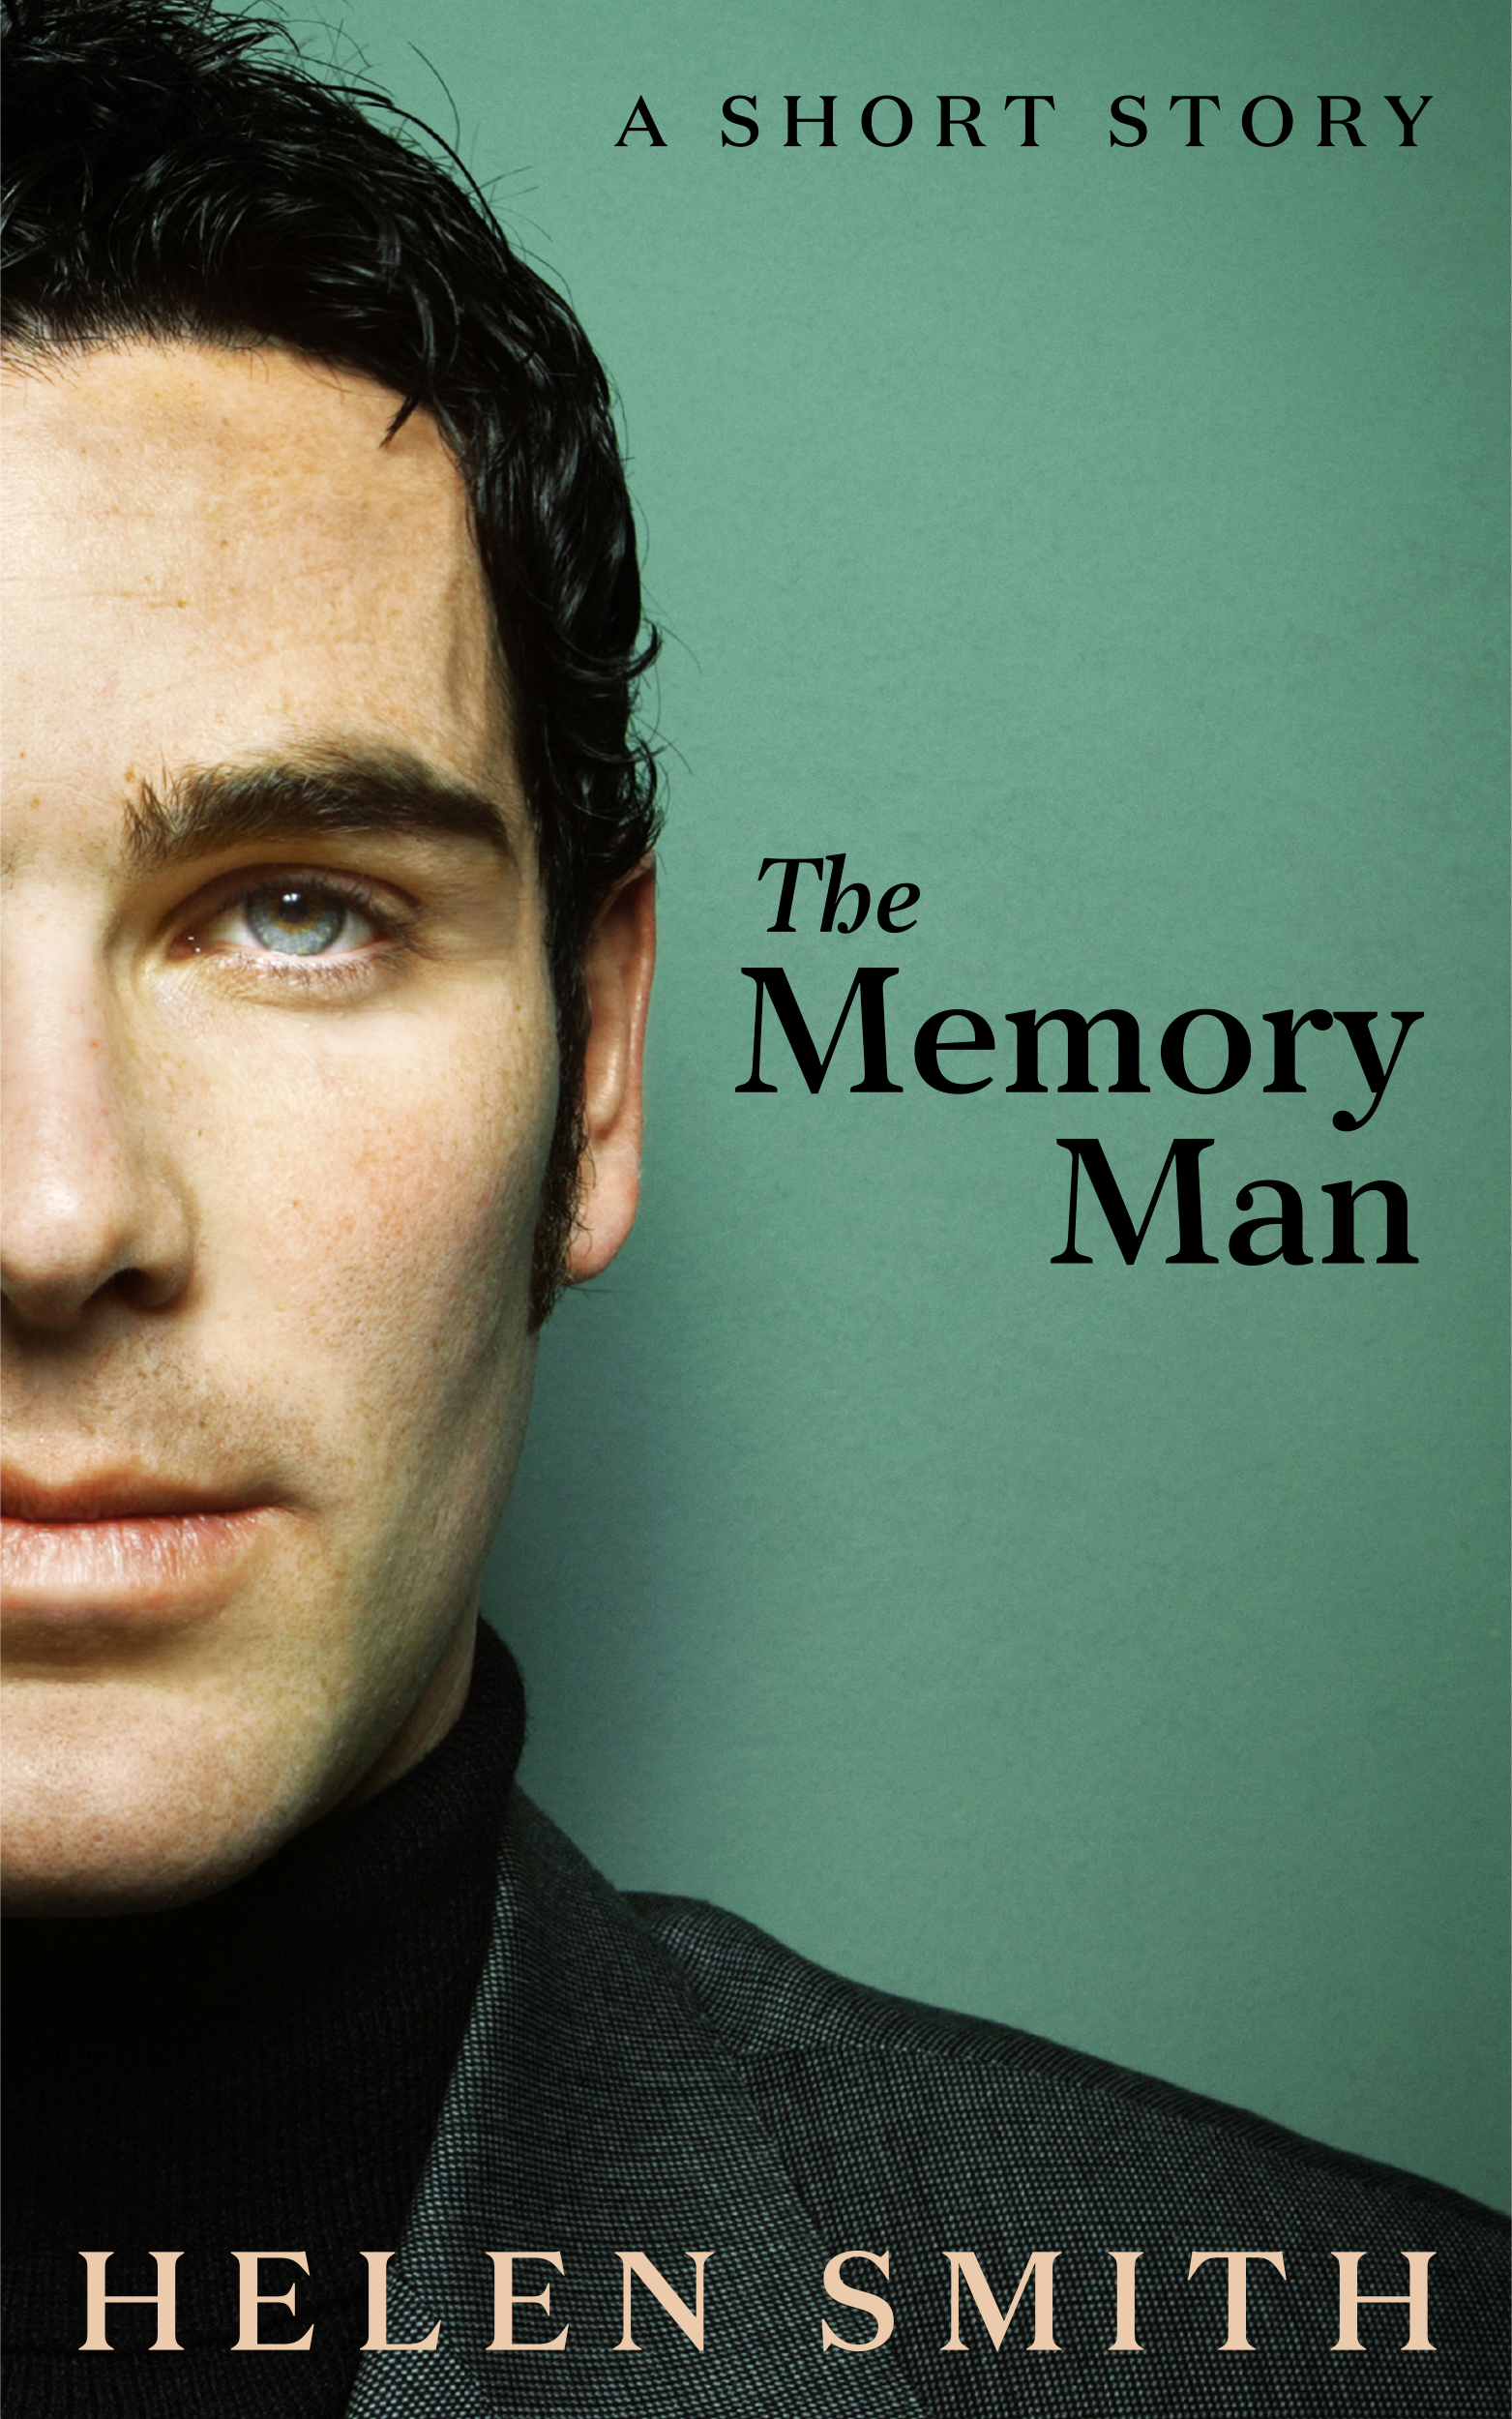 The Memory Man by Helen Smith